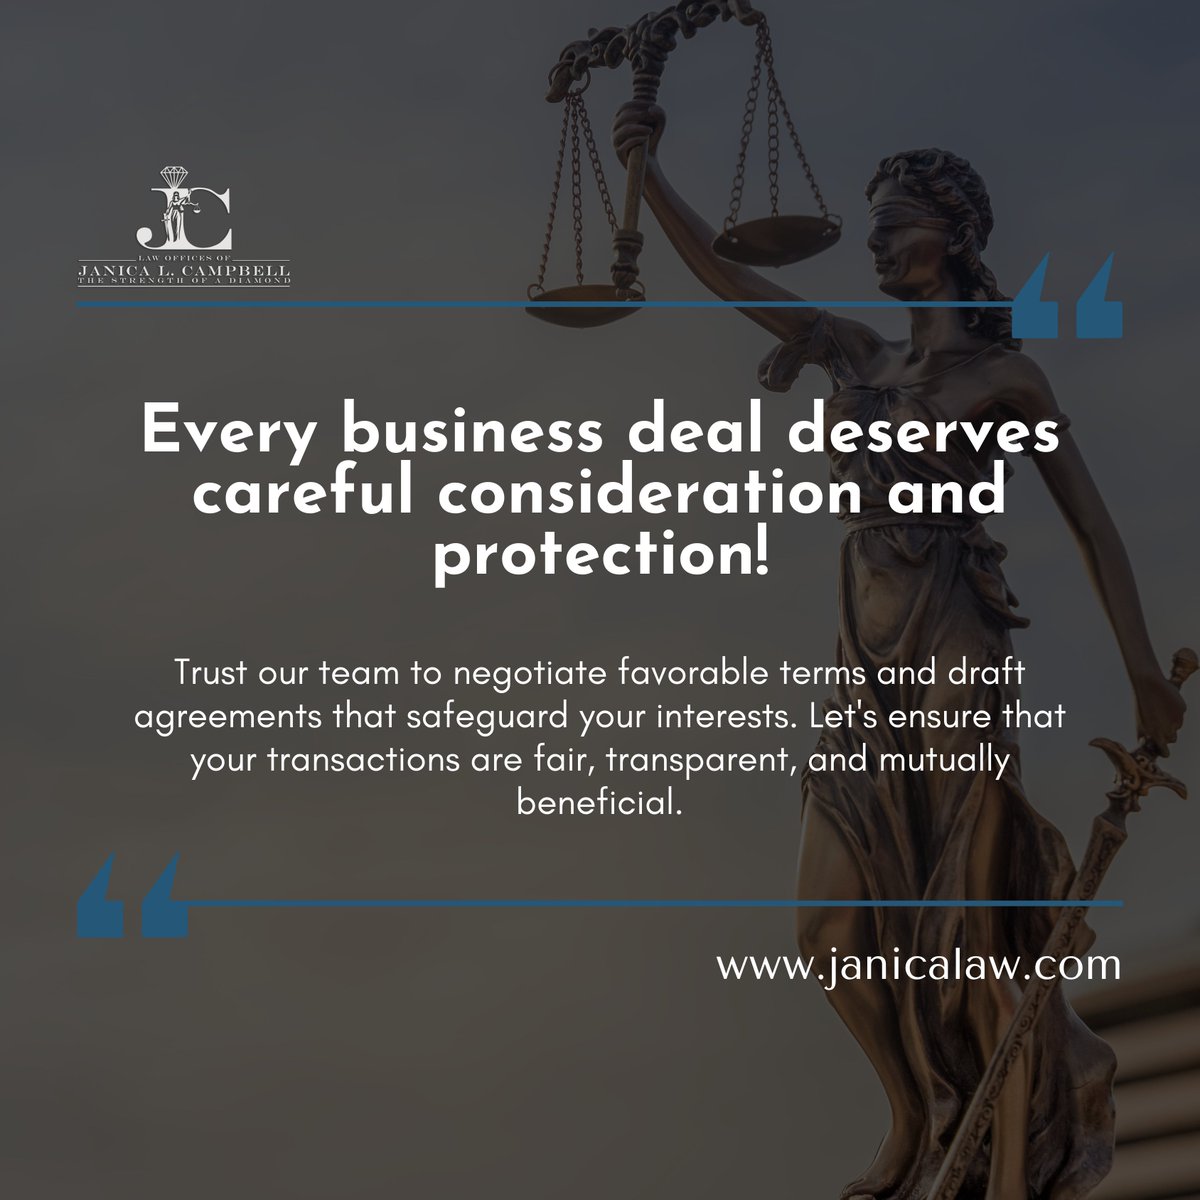 🔍 Every business deal deserves careful consideration and protection! 💼✨

Trust our expert team to negotiate favorable terms and draft agreements that safeguard your interests.

#BusinessDeals #DueDiligence #BusinessStrategy #RiskManagement #ProtectYourBusiness #BusinessSuccess